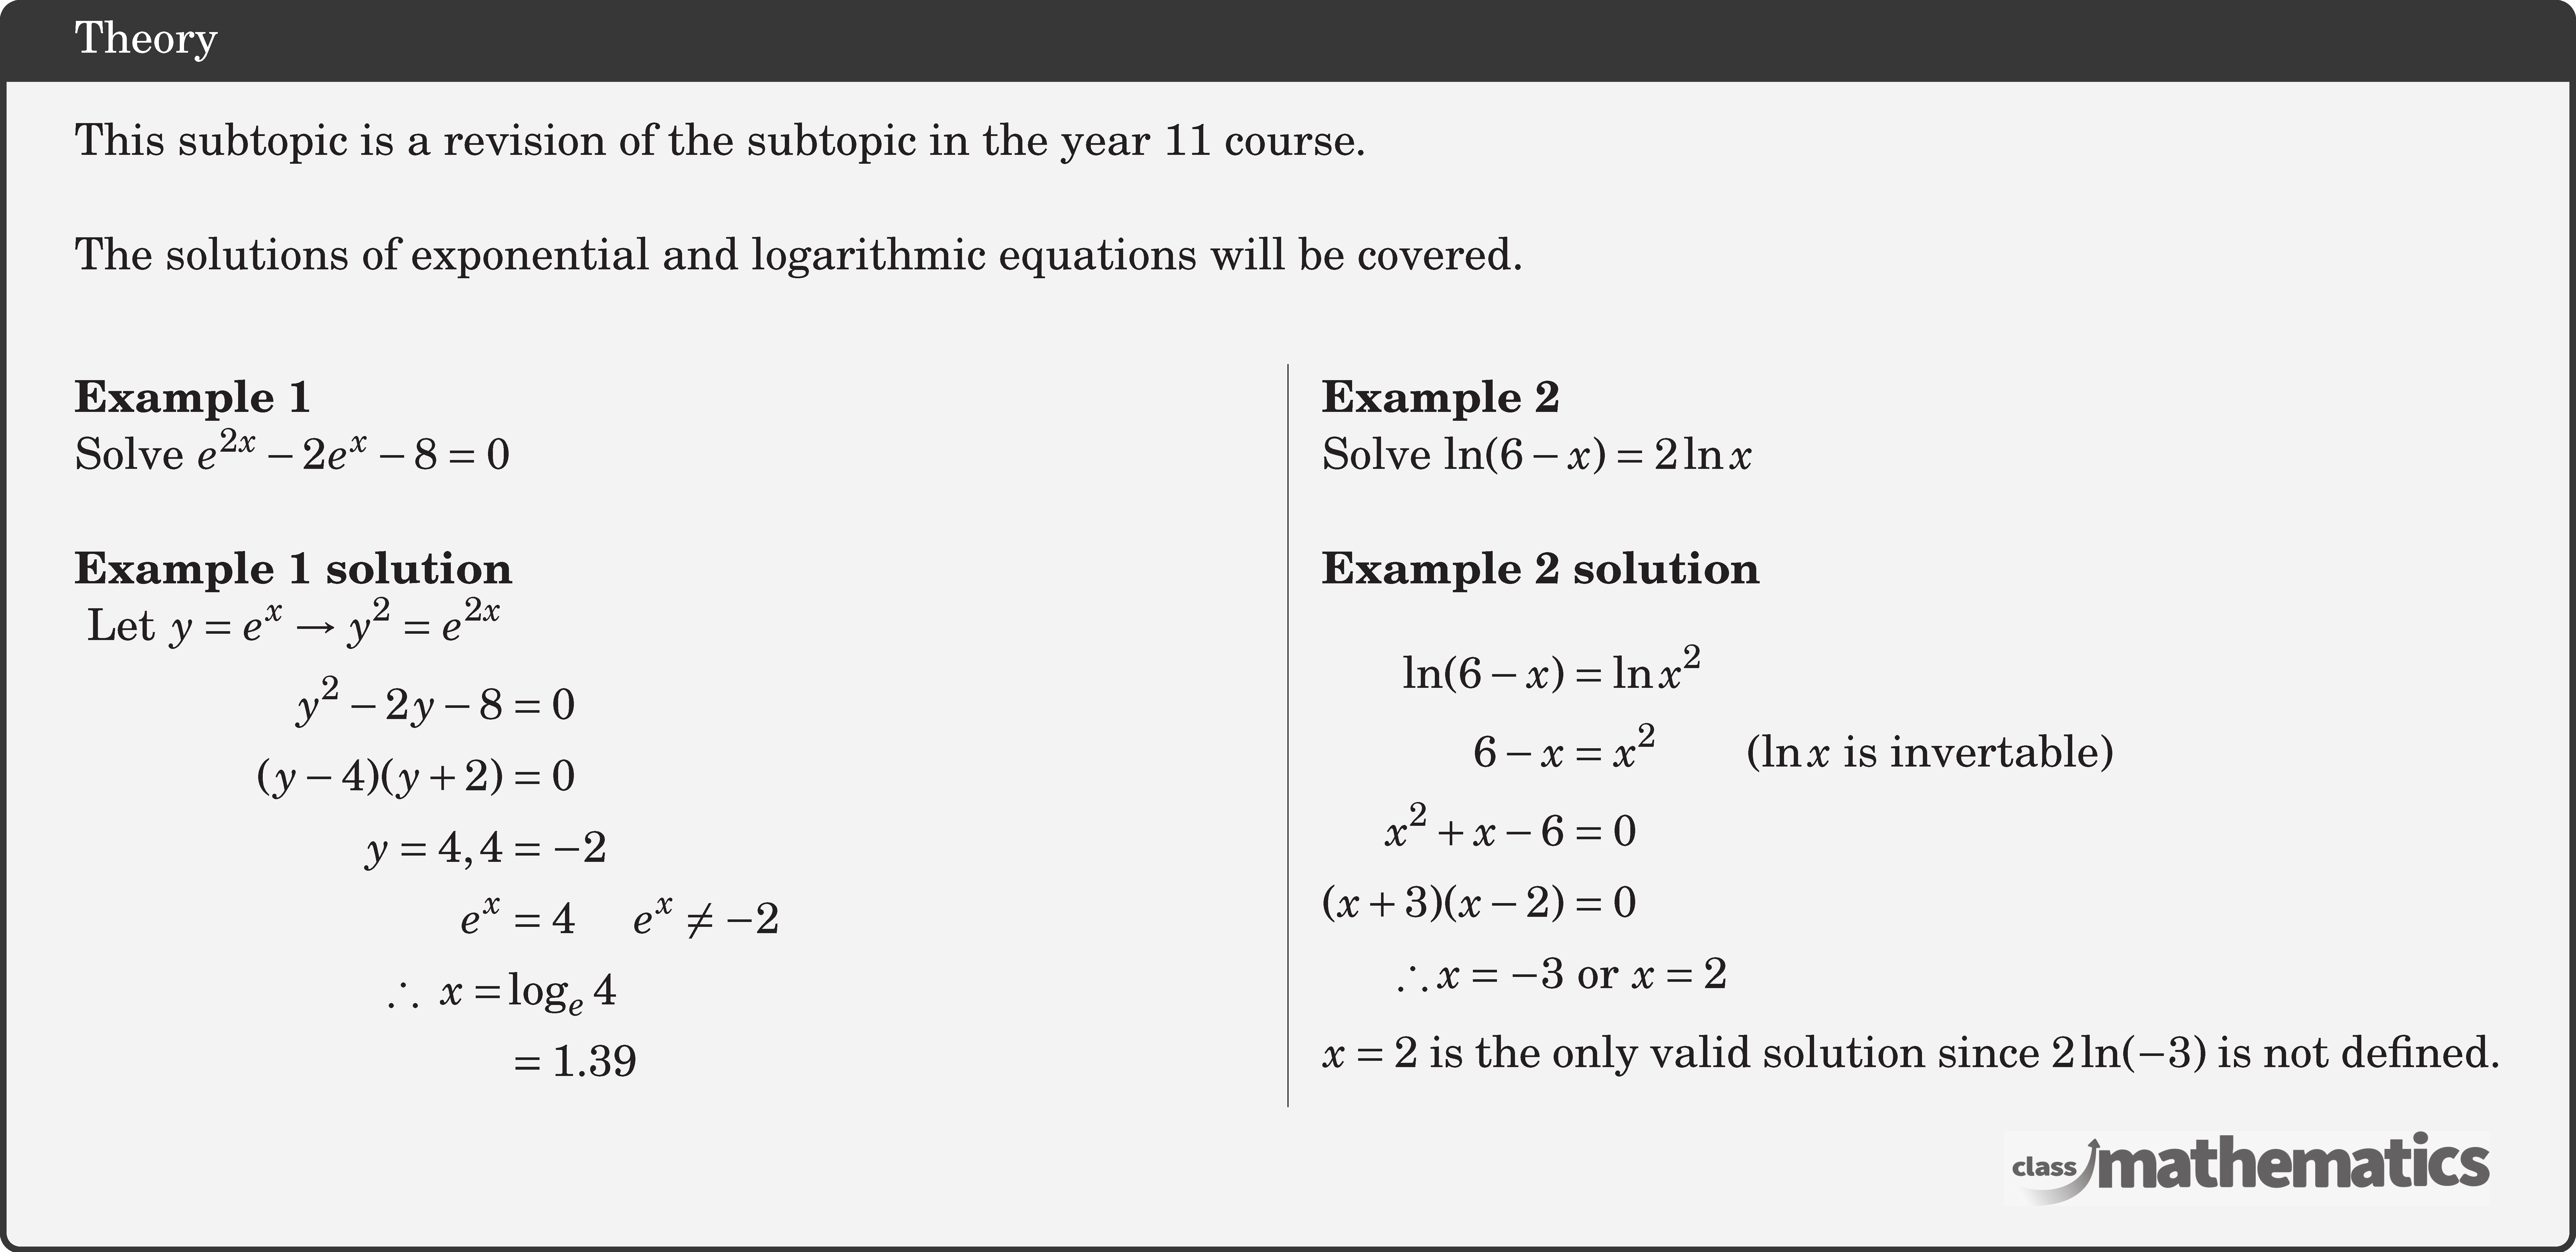 This subtopic is a revision of the subtopic in the year 11 course. \\  The solutions of exponential and logarithmic equations will be covered.\\  \begin{multicols}{2}  \textbf{Example 1}\\ %10643 Solve \({e^{2x}} - 2{e^x} - 8 = 0\)\\  \textbf{Example 1 solution}\\ $\begin{aligned}\text { Let } y=e^{x} \rightarrow y^{2}=e^{2 x} \\ y^{2}-2 y-8&=0 \\ (y-4)(y+2)&=0  \\ y=4,4&=-2  \\ e^{x}&=4\quad  e^{x} \neq-2 \\ \therefore\ x=& \log _{e} 4 \\ & =1.39 \end{aligned}$\\  \columnbreak \textbf{Example 2}\\ %7 (30976) Solve \(\ln(6 - x) = 2\ln x\)\\  \textbf{Example 2 solution}\\  $\begin{aligned} \ln(6 - x) &= \ln x^2\\ 6-x &= x^2 \qquad (\ln x \text{ is invertable})\\ x^2 + x - 6 &= 0\\(x + 3)(x - 2) &= 0\\ \therefore x = -3 &\text{ or } x = 2 \end{aligned}$\\  \(x = 2\) is the only valid solution since \(2\ln(-3)\) is not defined.   \end{multicols}